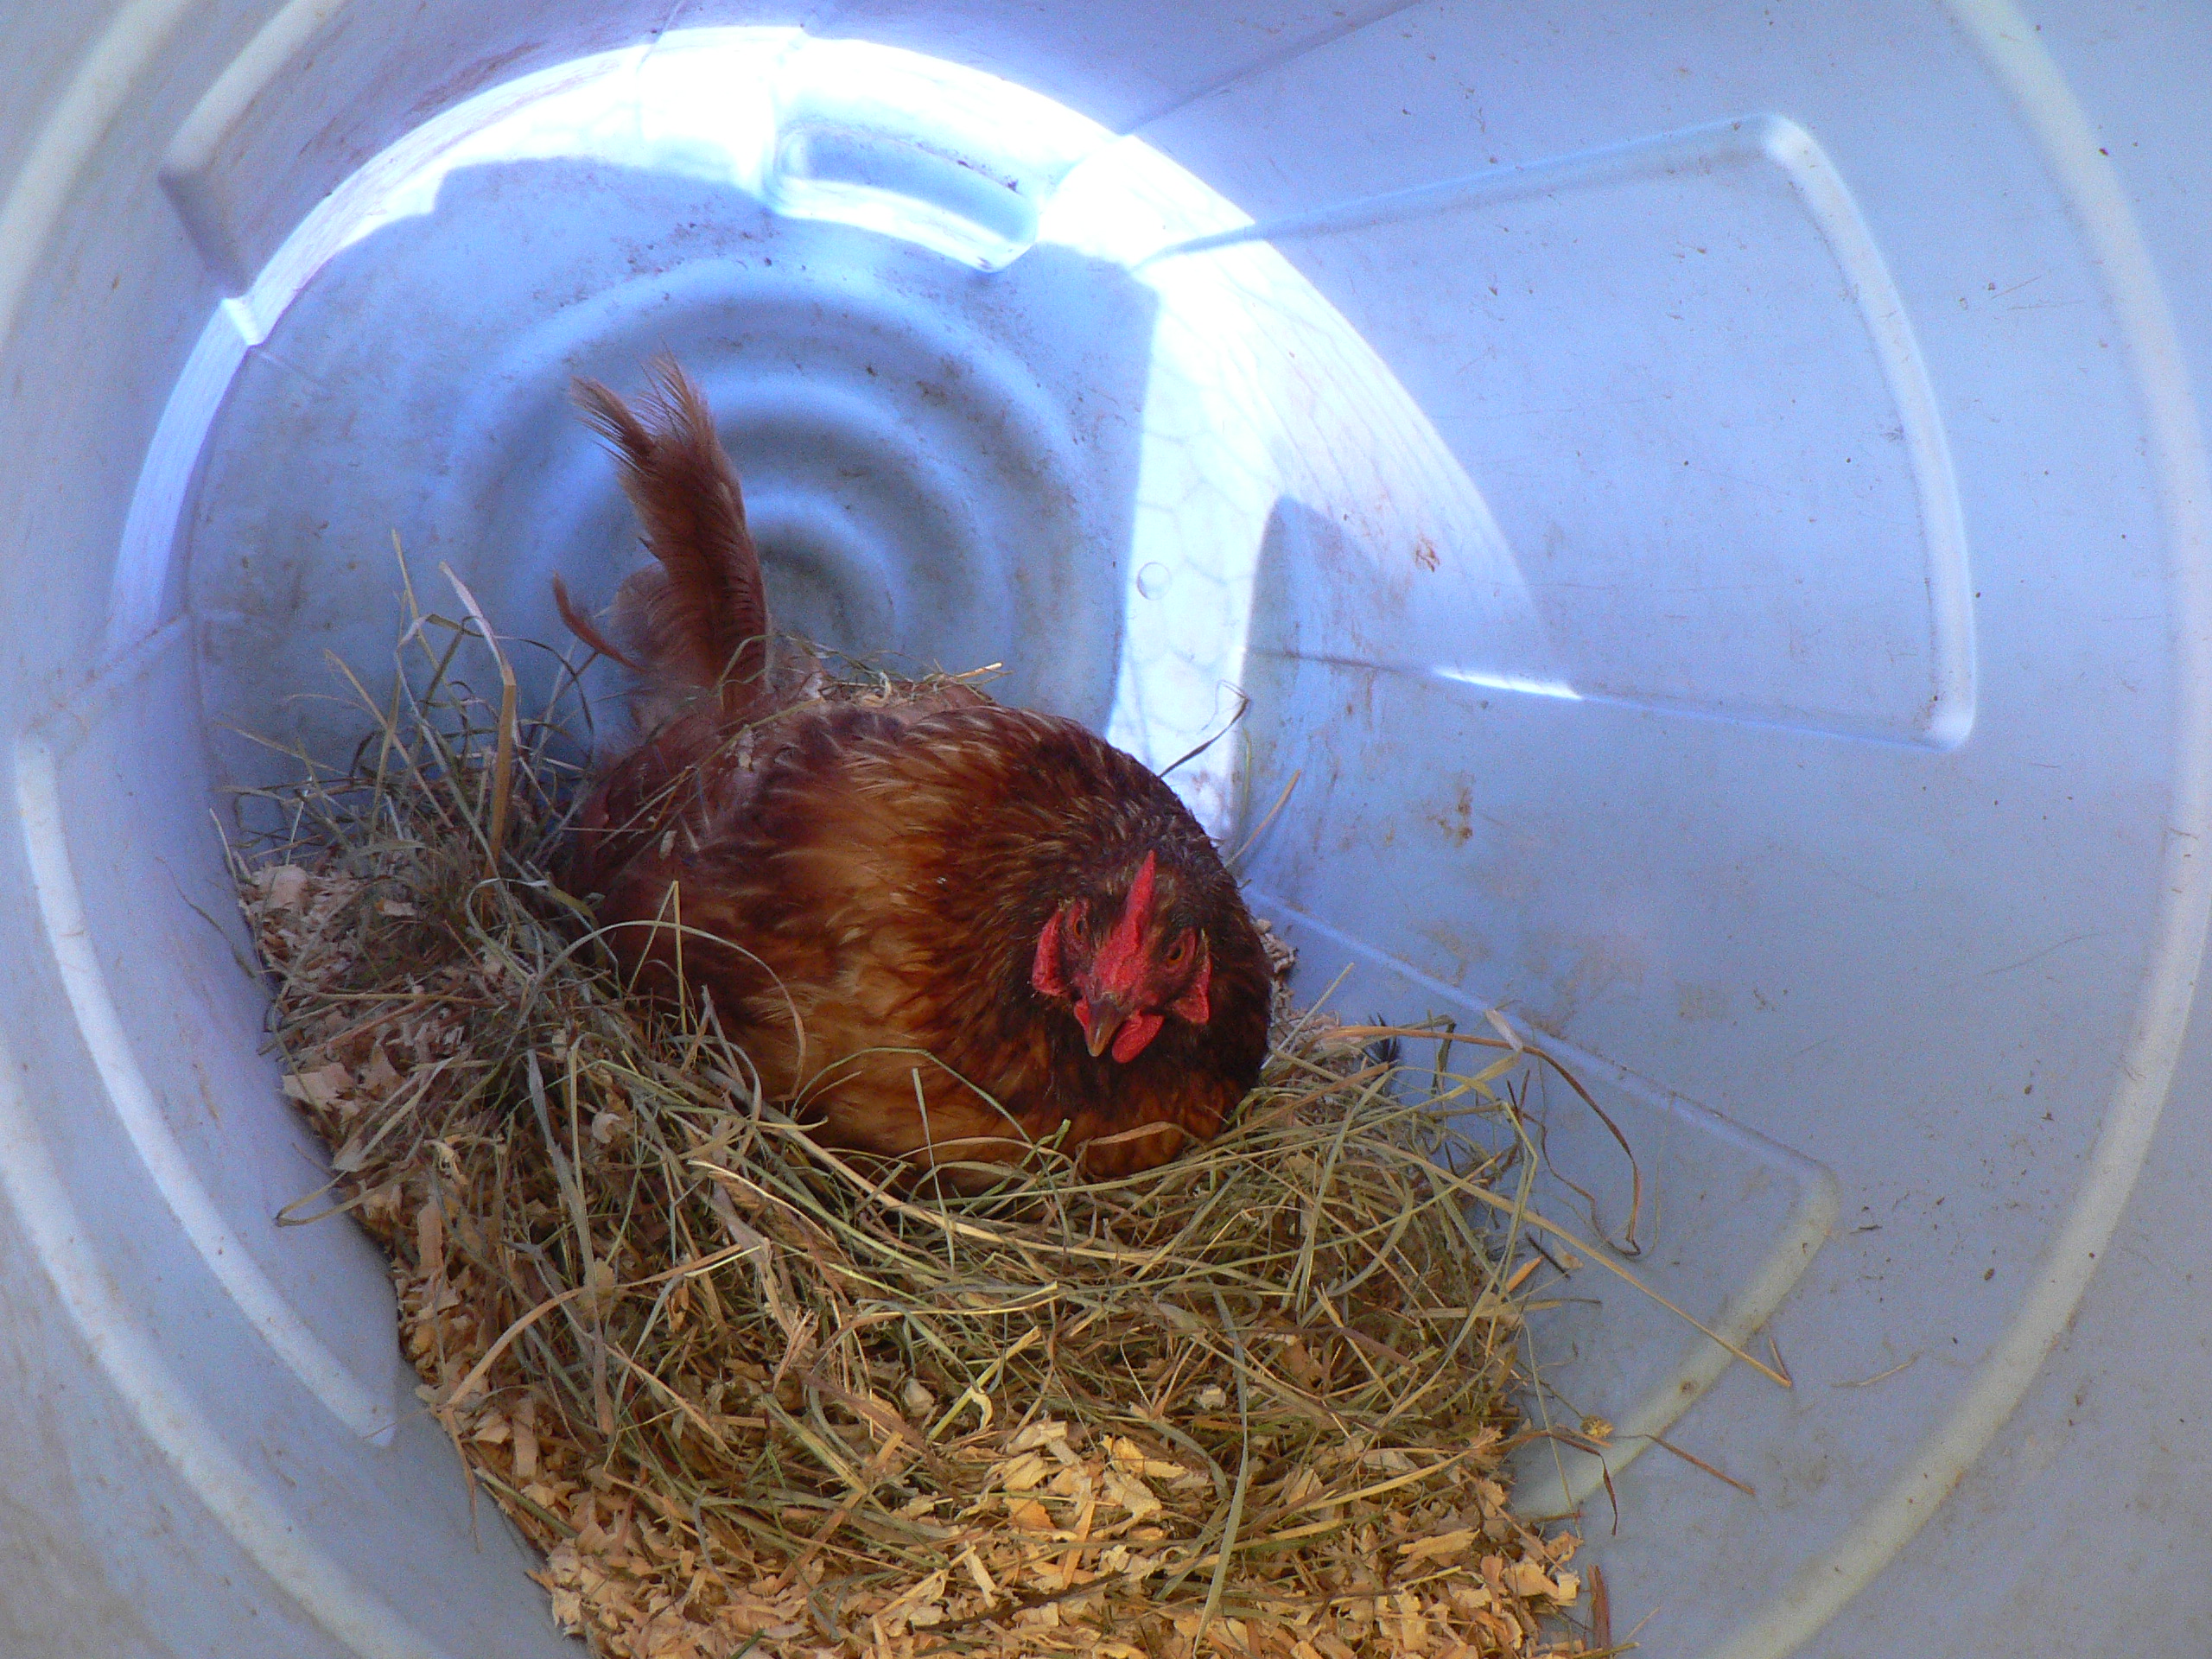 my new RIR girl - she was getting singled out by a big rooster up the road so I bought her. She will now have the whole winter to relax before she meets up with another rooster :)